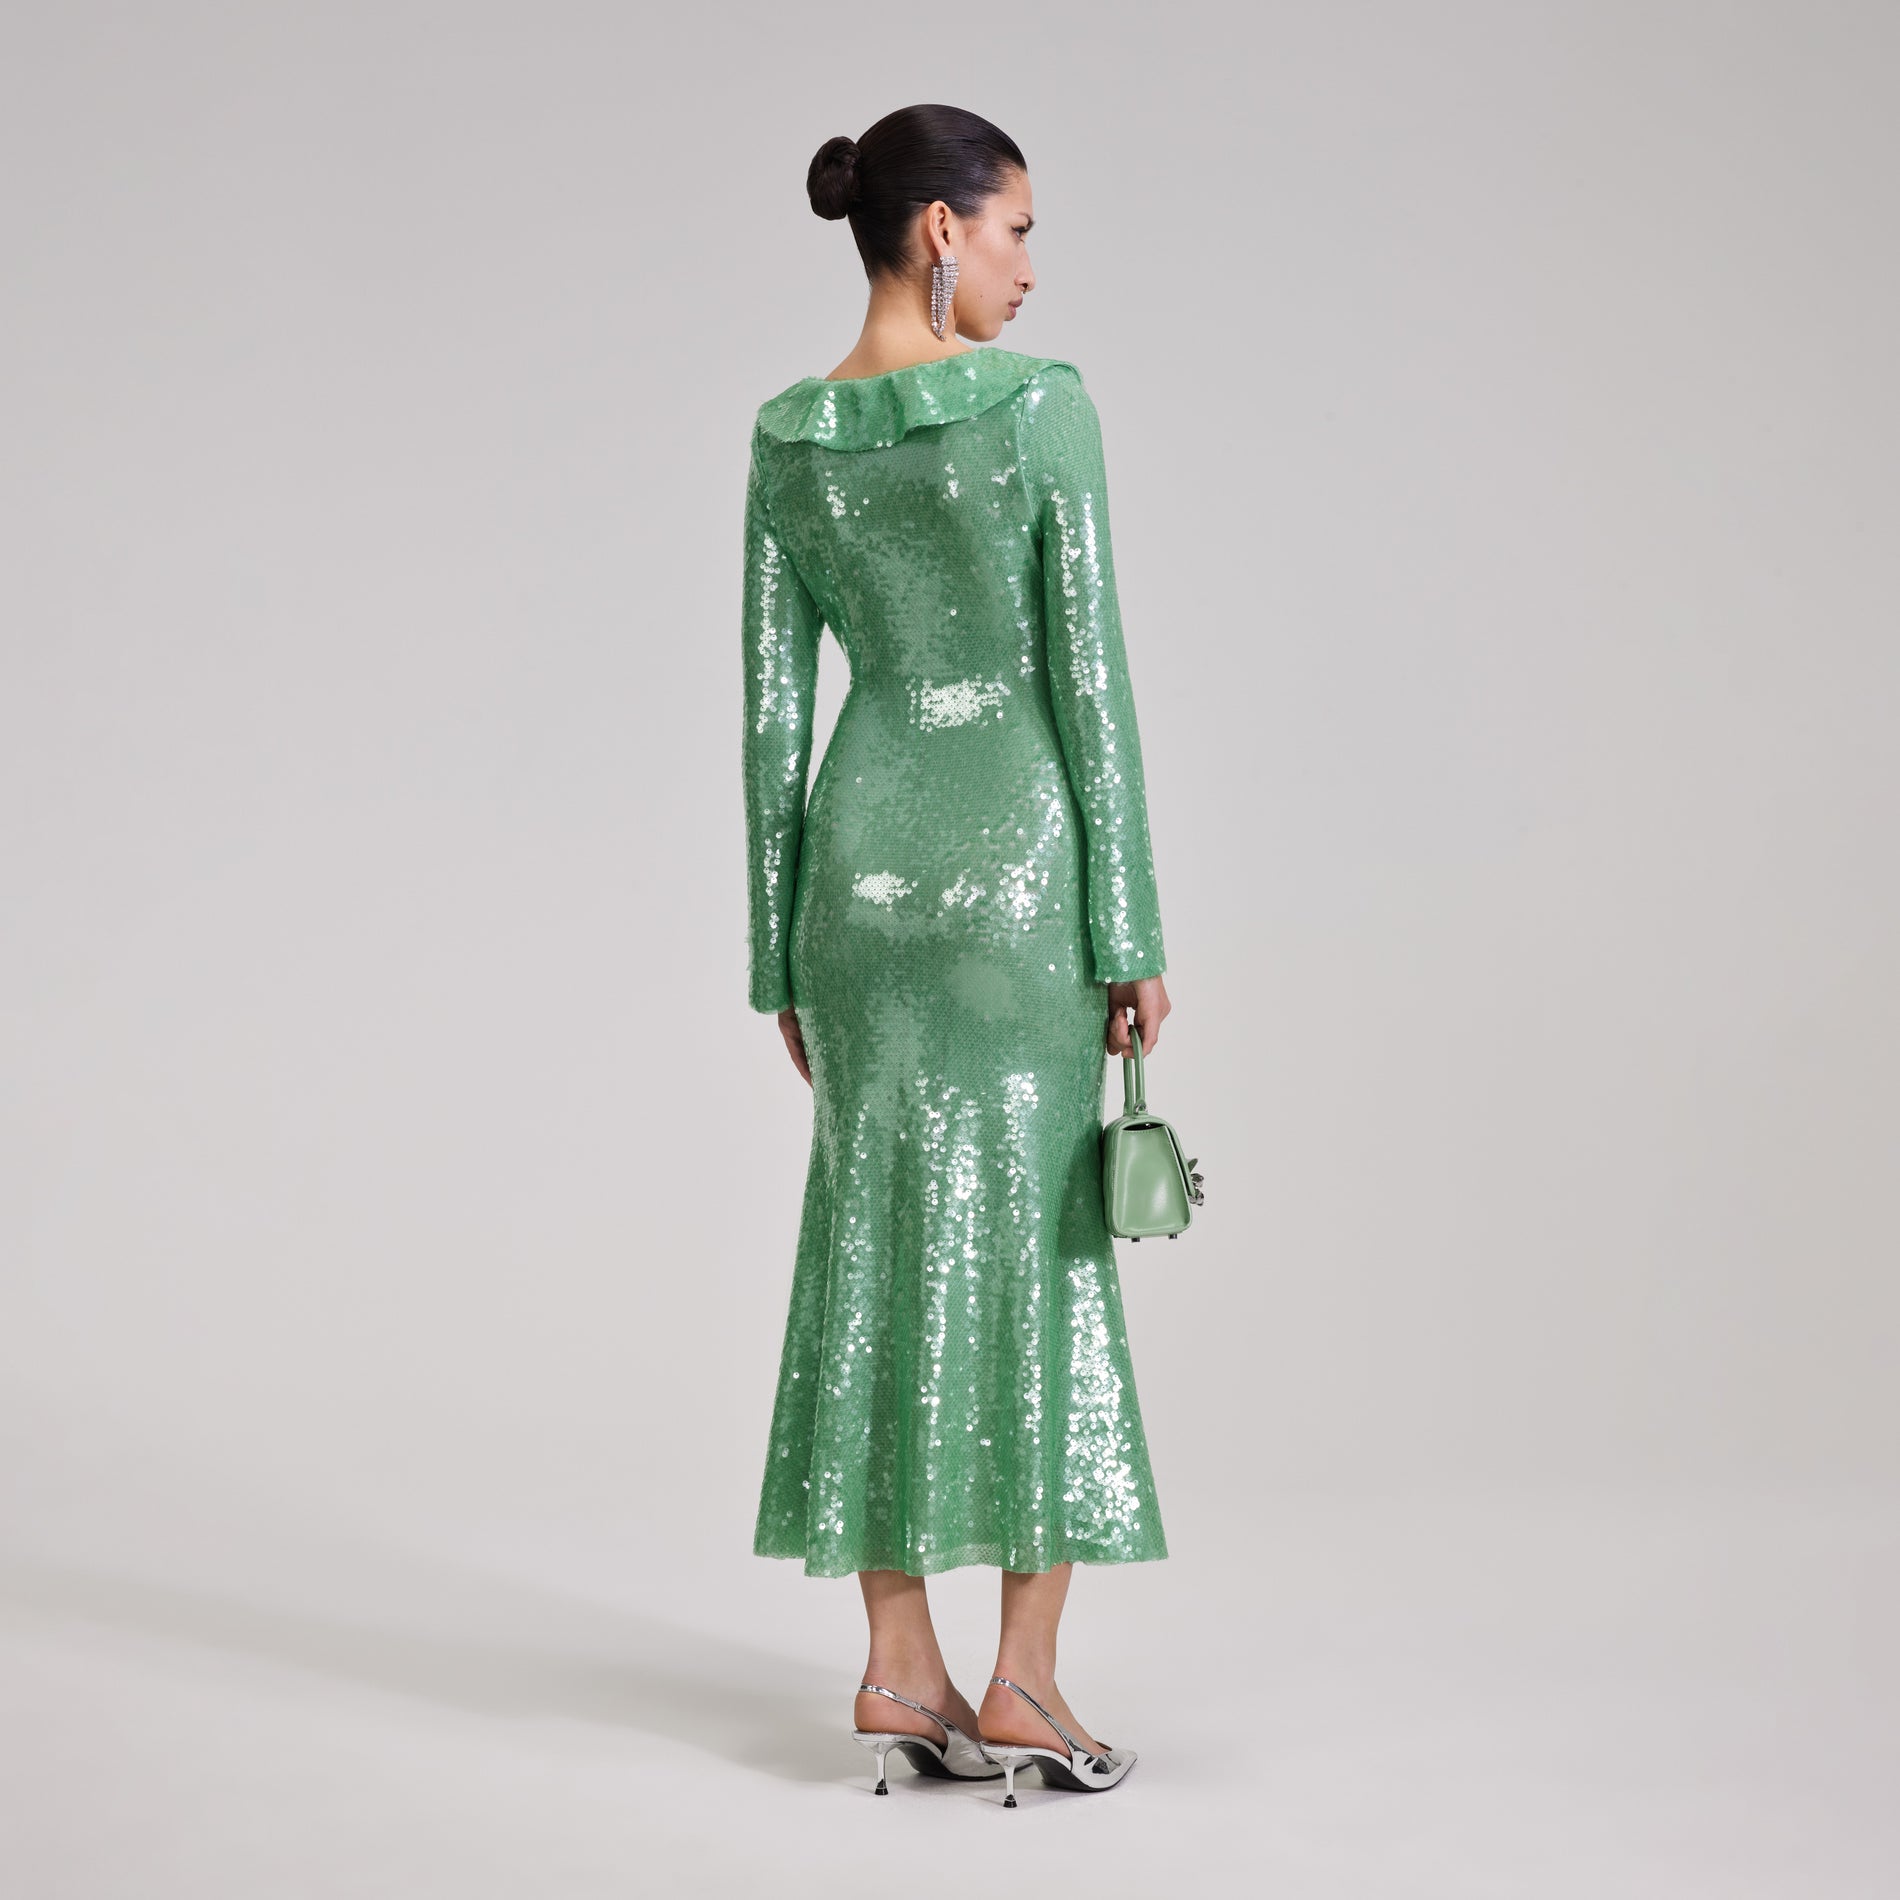 A woman wearing the Green Sequin Midi Dress